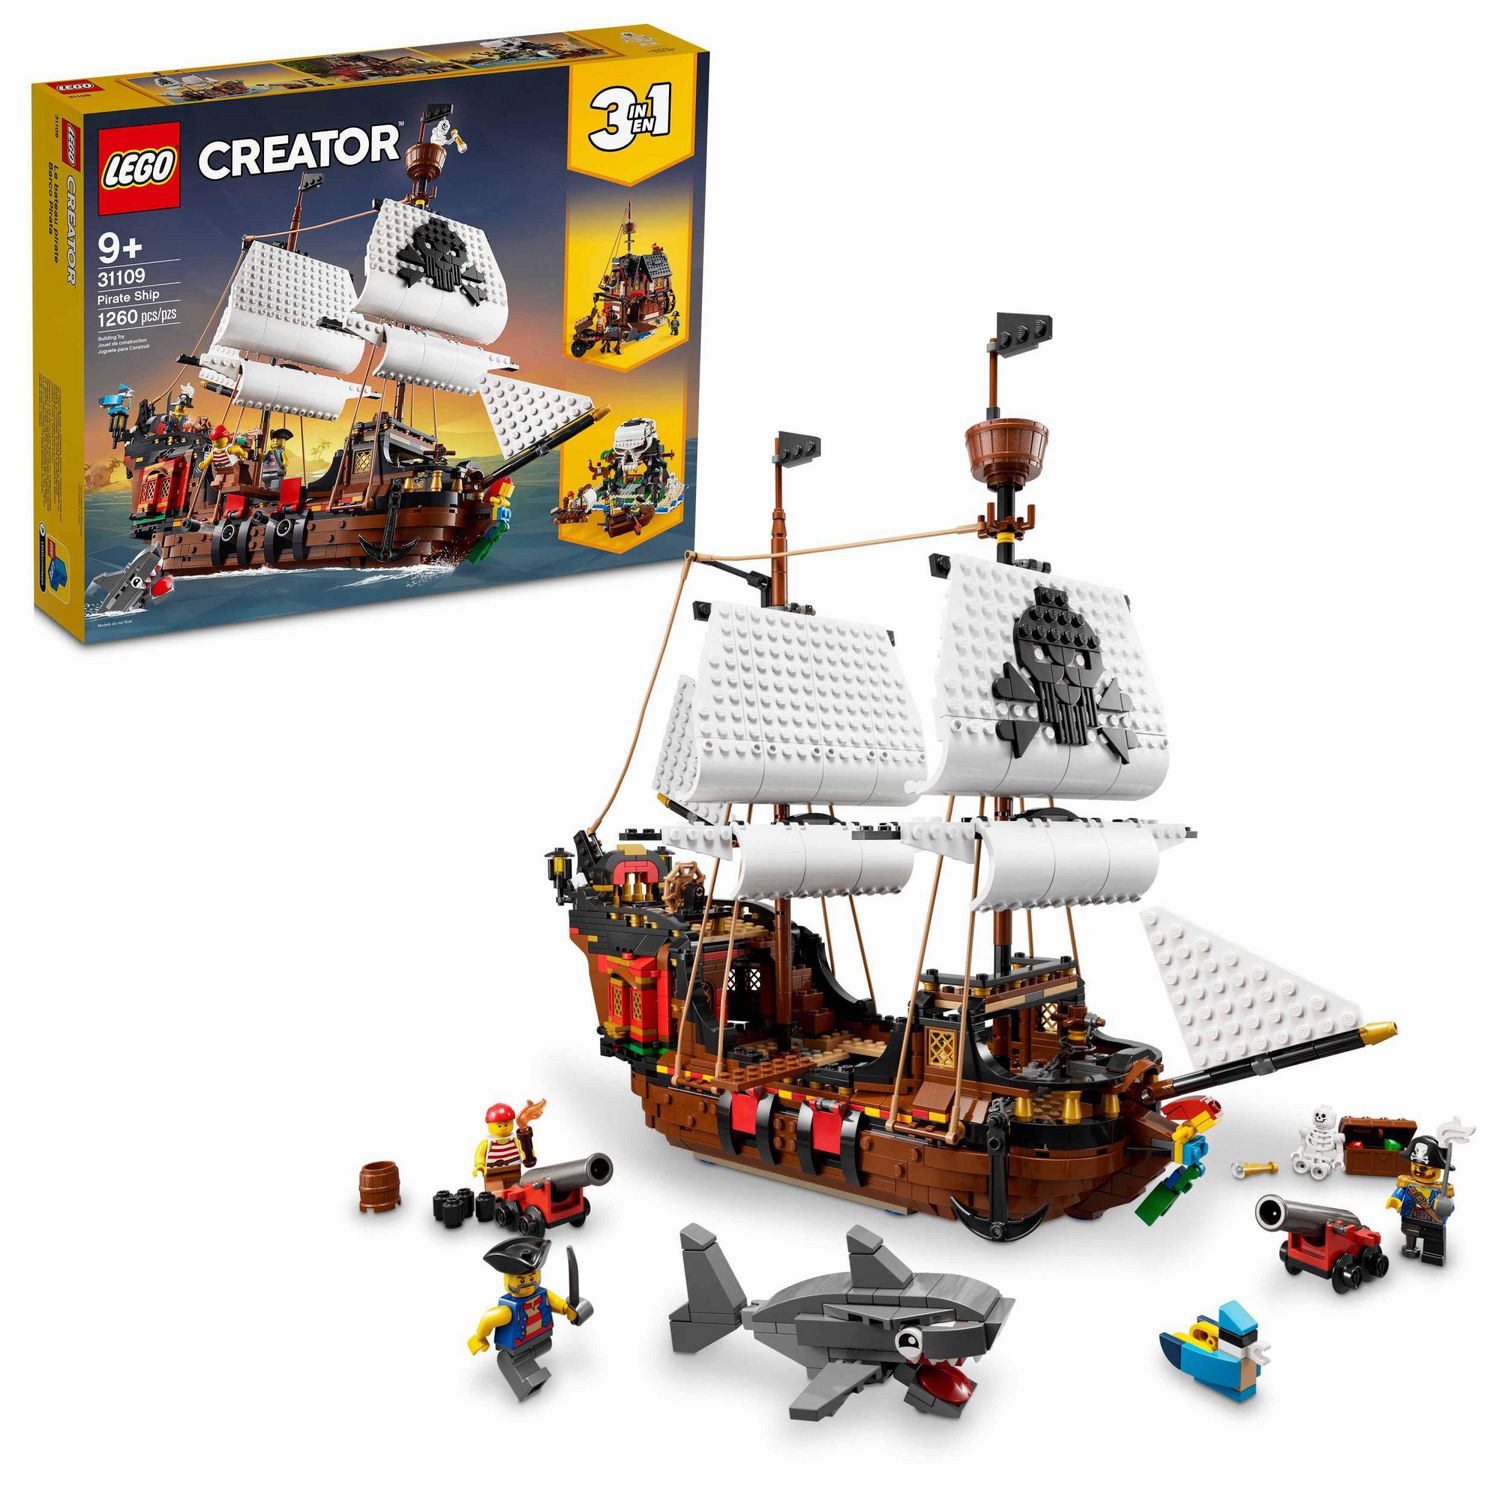 Lego creator in pirate ship toy building kit pieces